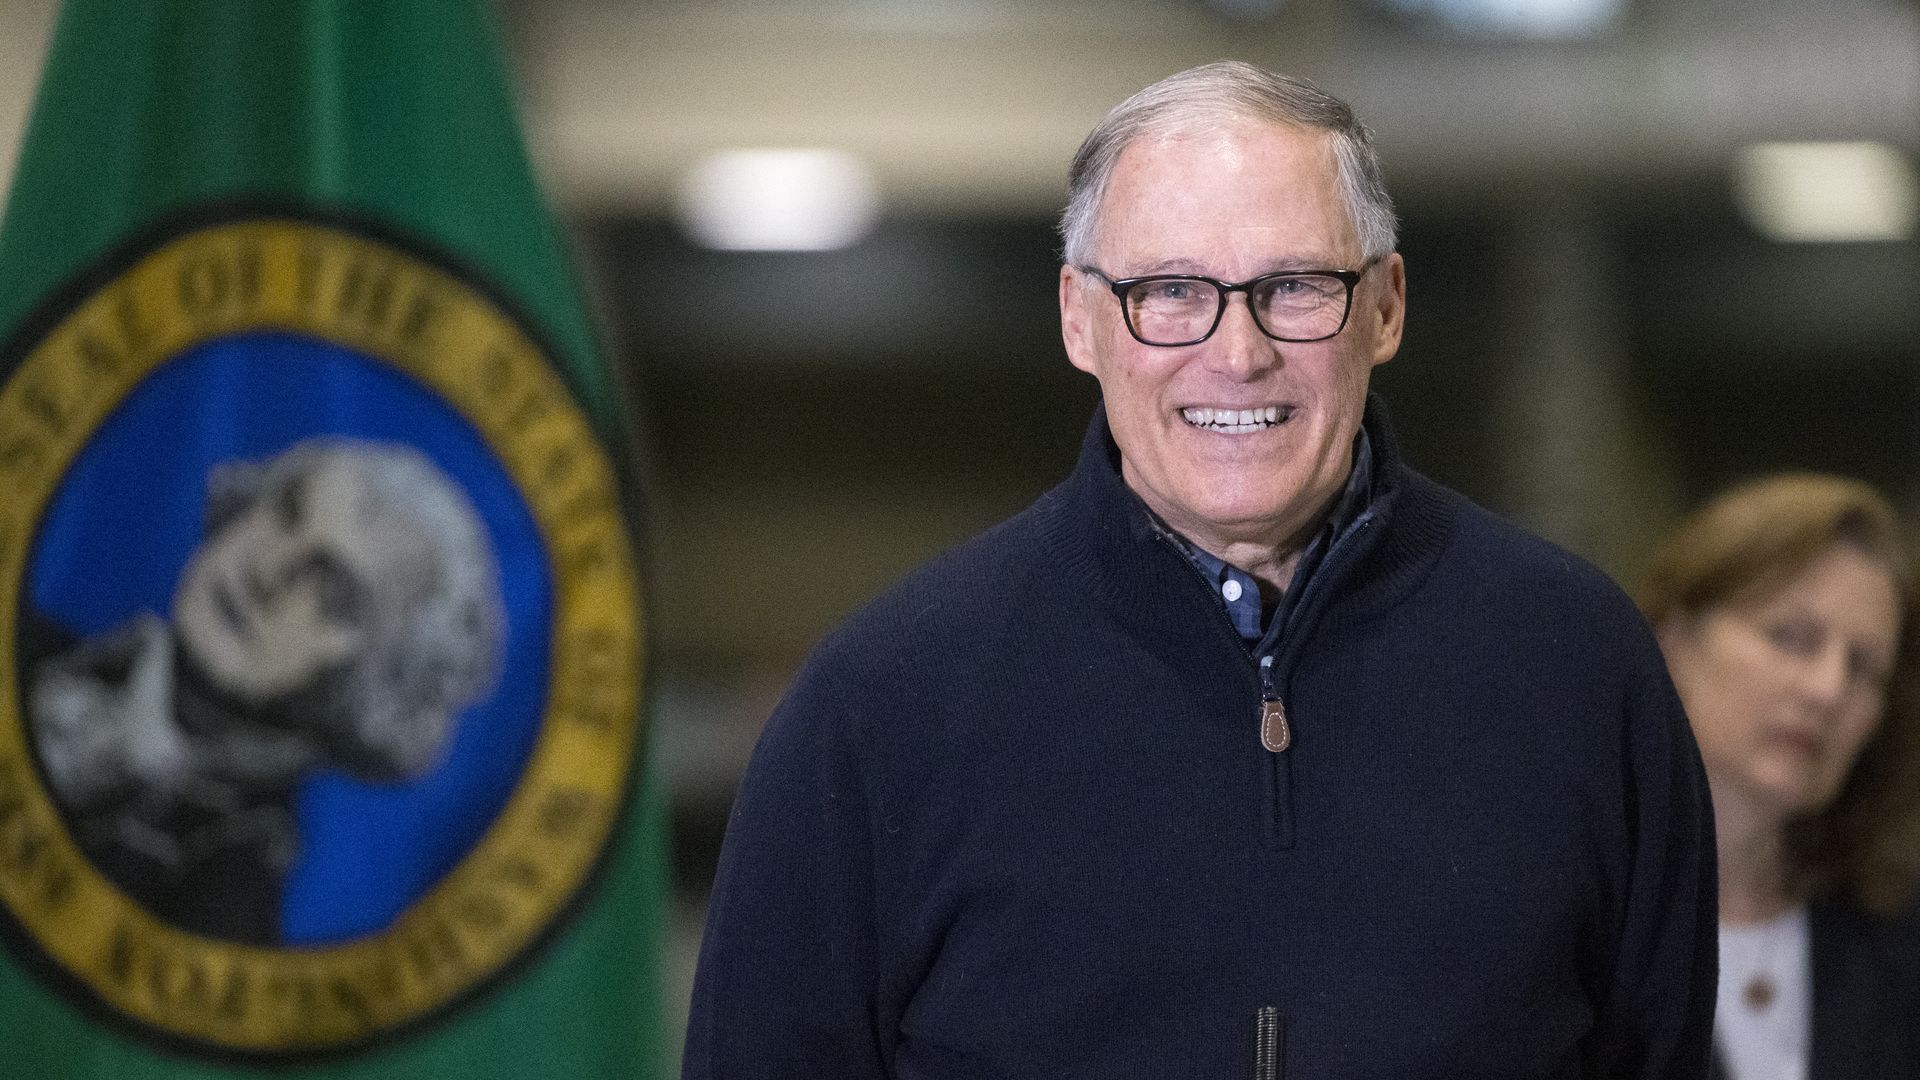 Gov. Inslee smiles while wearing a pullover while next to a flag of the state of Washington.